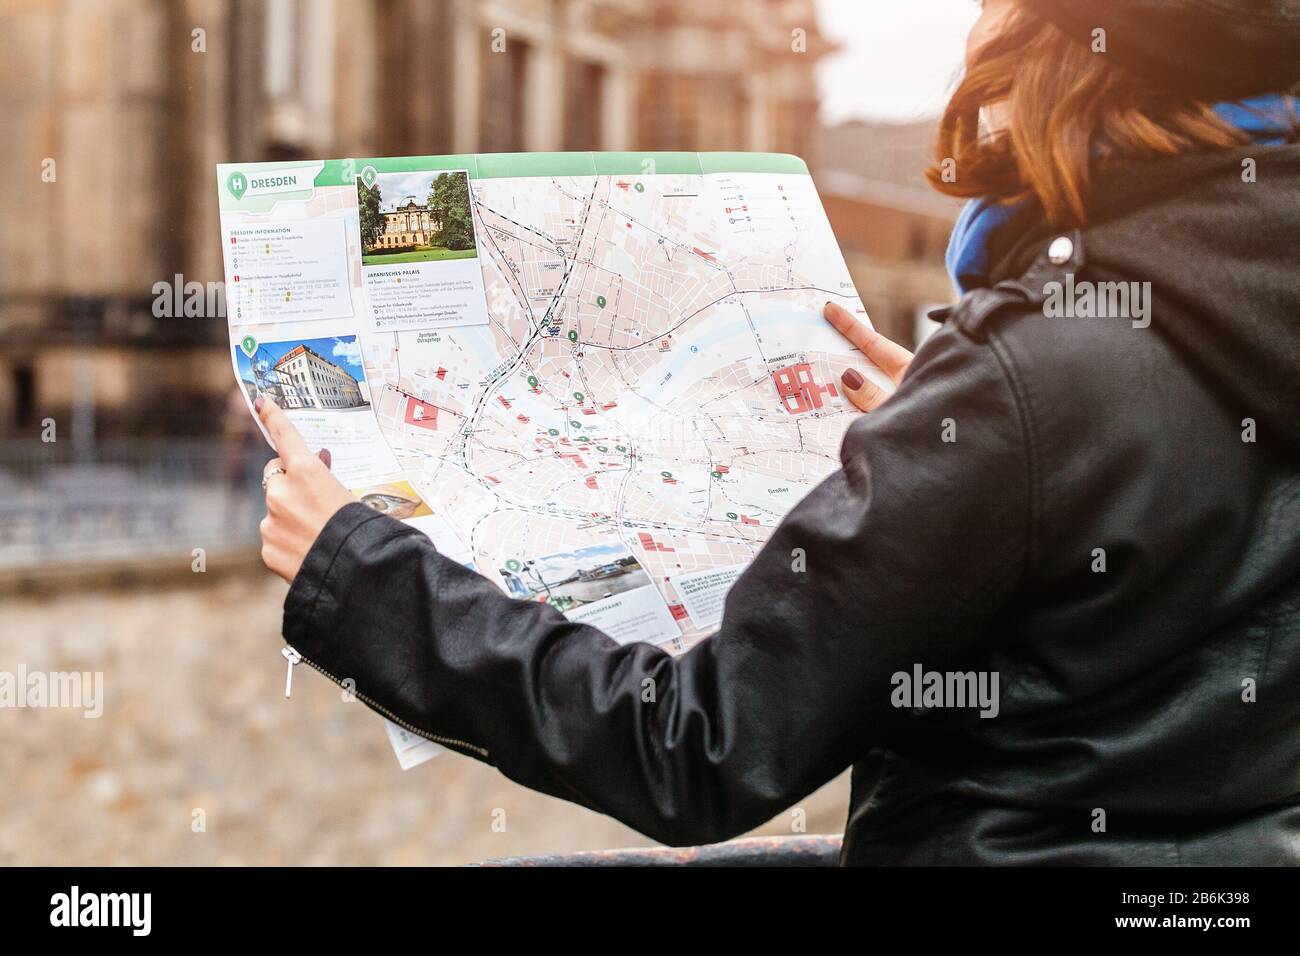 DRESDEN, GERMANY, MARCH 21, 2017: Woman looking to the map of Dresden in the old city street, closeup shot Stock Photo